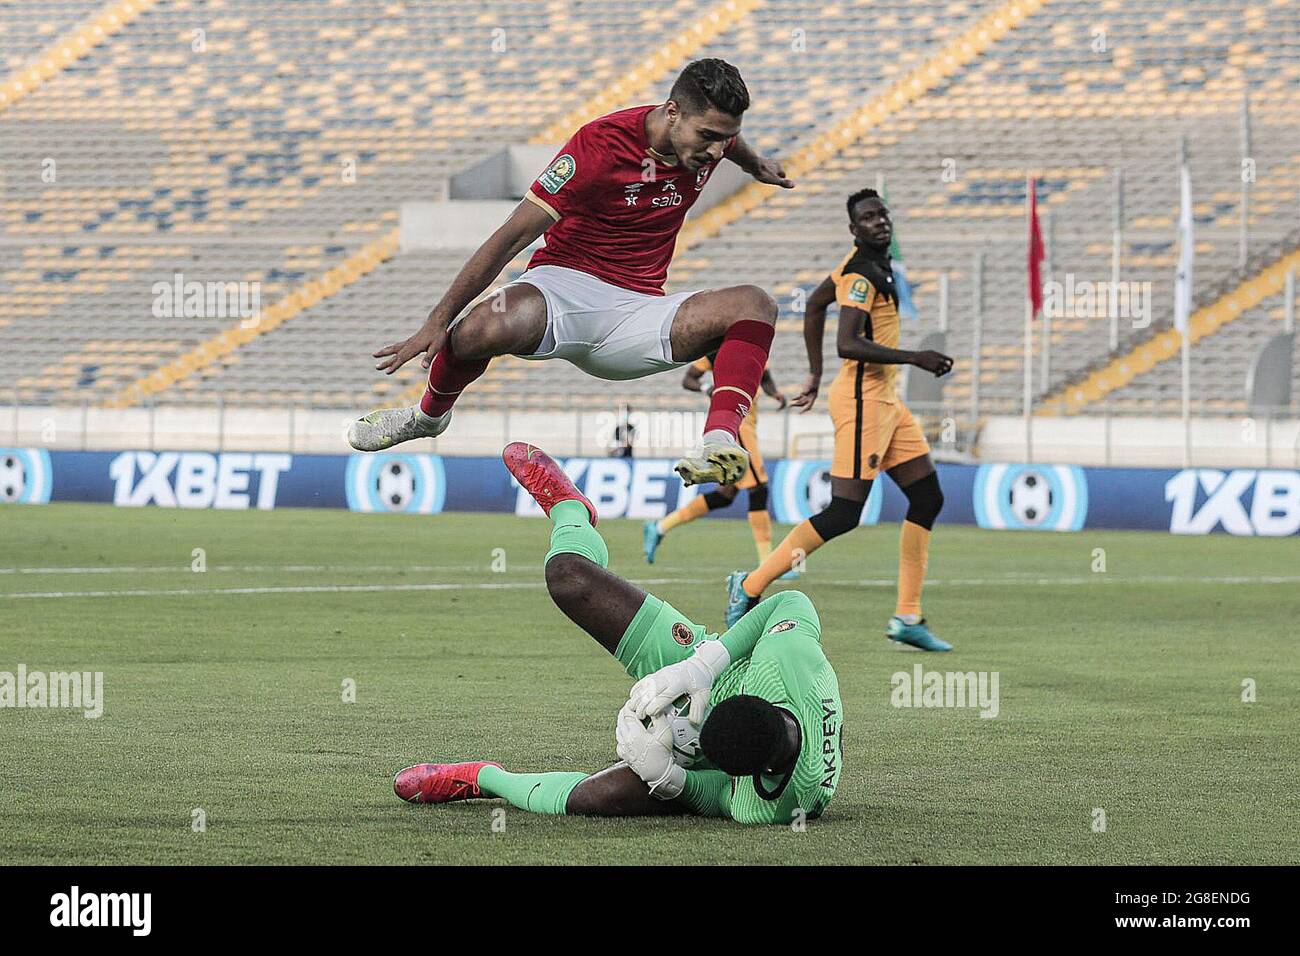 Casablanca, Morocco. 17th July, 2021. Al Ahly's Mohamed Sherif (above) and Kaizer goalkeeper Daniel Akpeyi battle for the ball during the CAF Champions League final between Kaizer Chiefs FC and Al Ahly SC at Mohamed V Stadium. Credit: Stringer/dpa/Alamy Live News Stock Photo